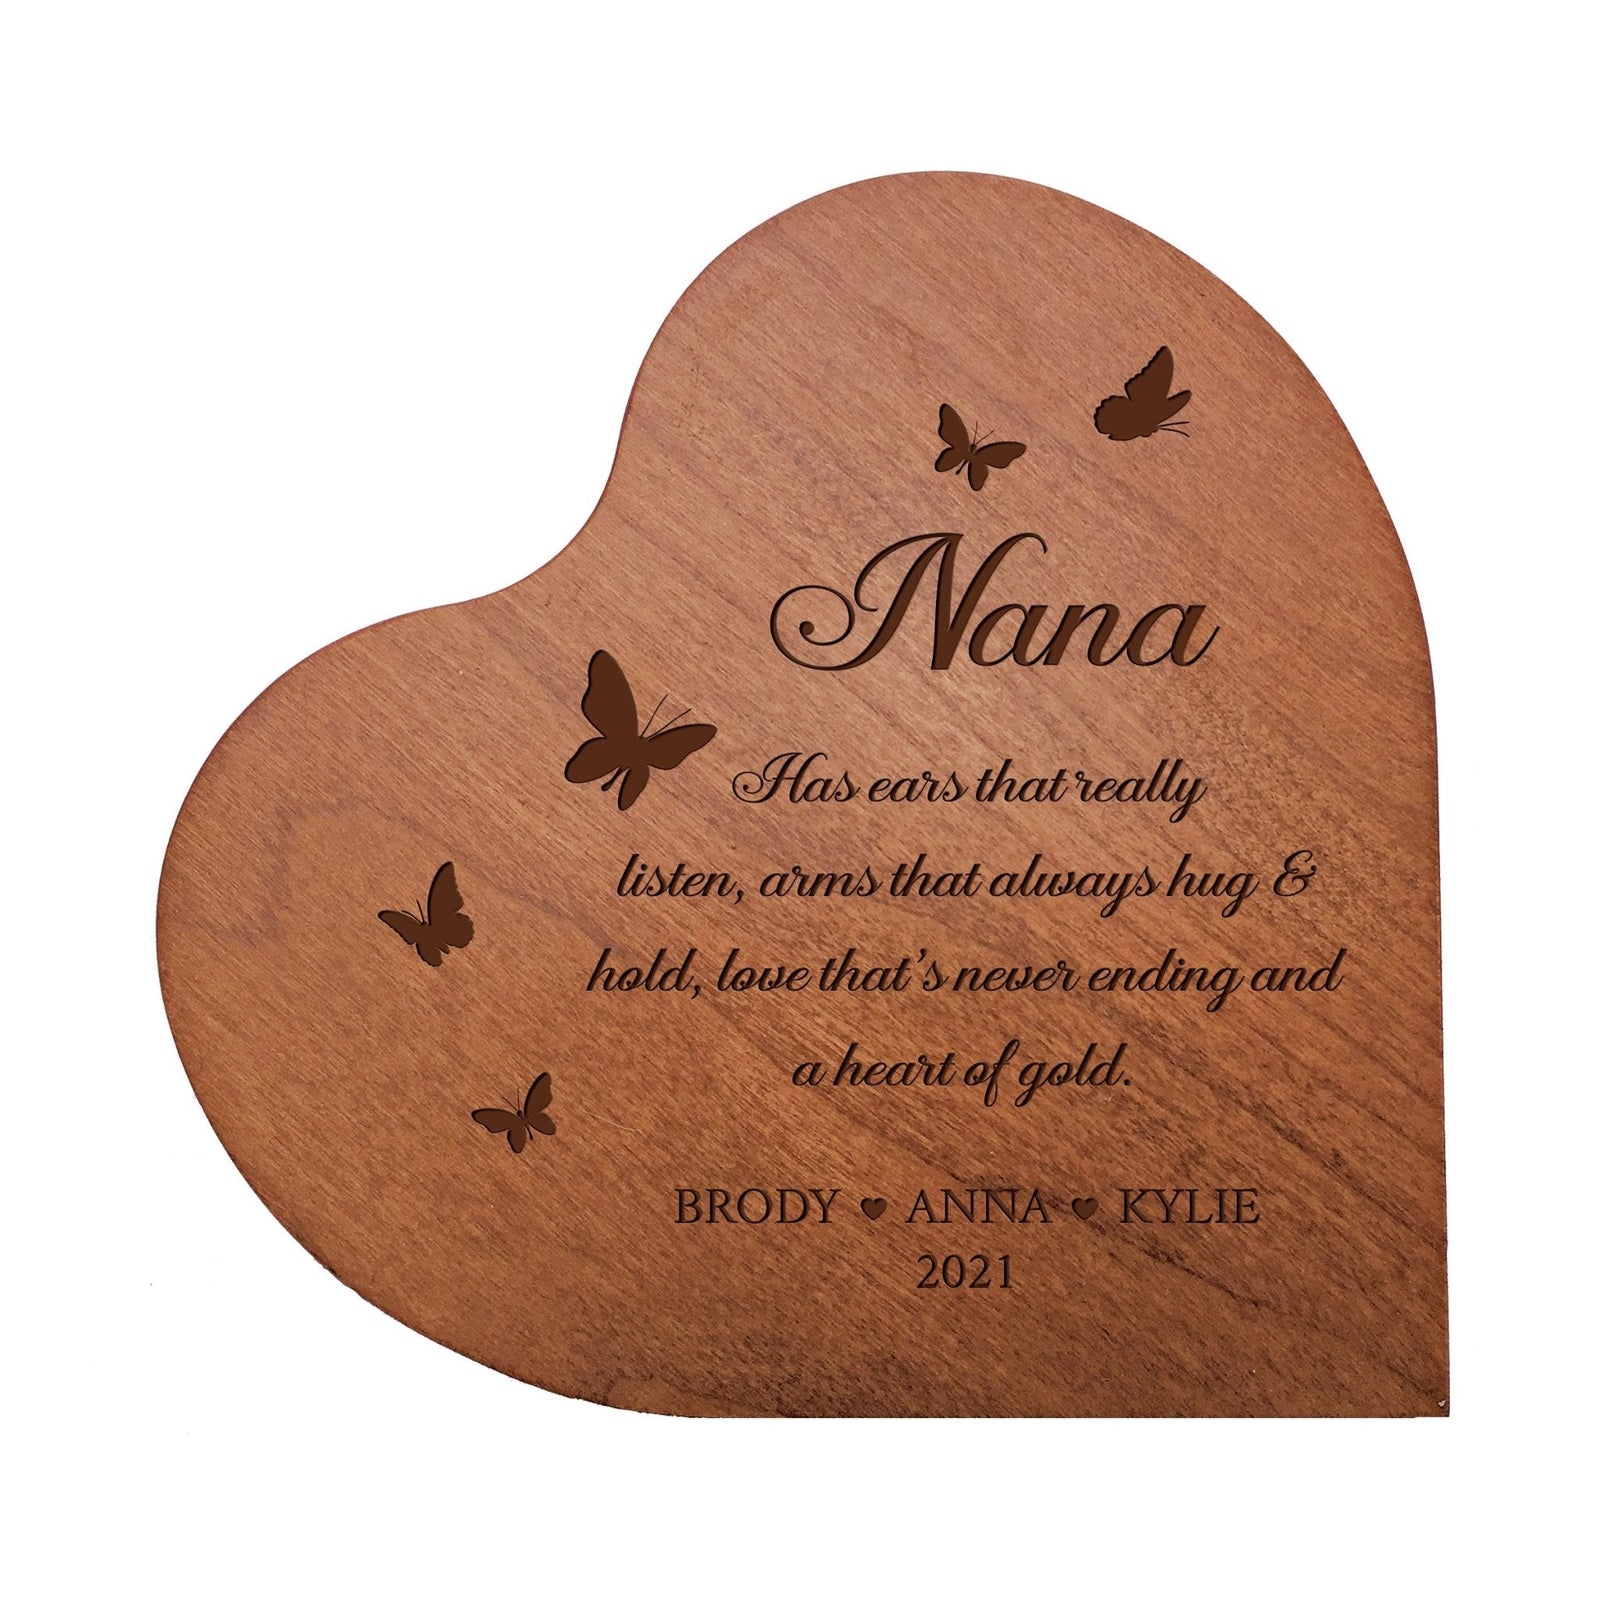 Personalized Modern Nana’s Love Solid Wood Heart Decoration With Inspirational Verse Keepsake Gift 5x5.25 - Nana Has Ears That Really = Never Ending - LifeSong Milestones